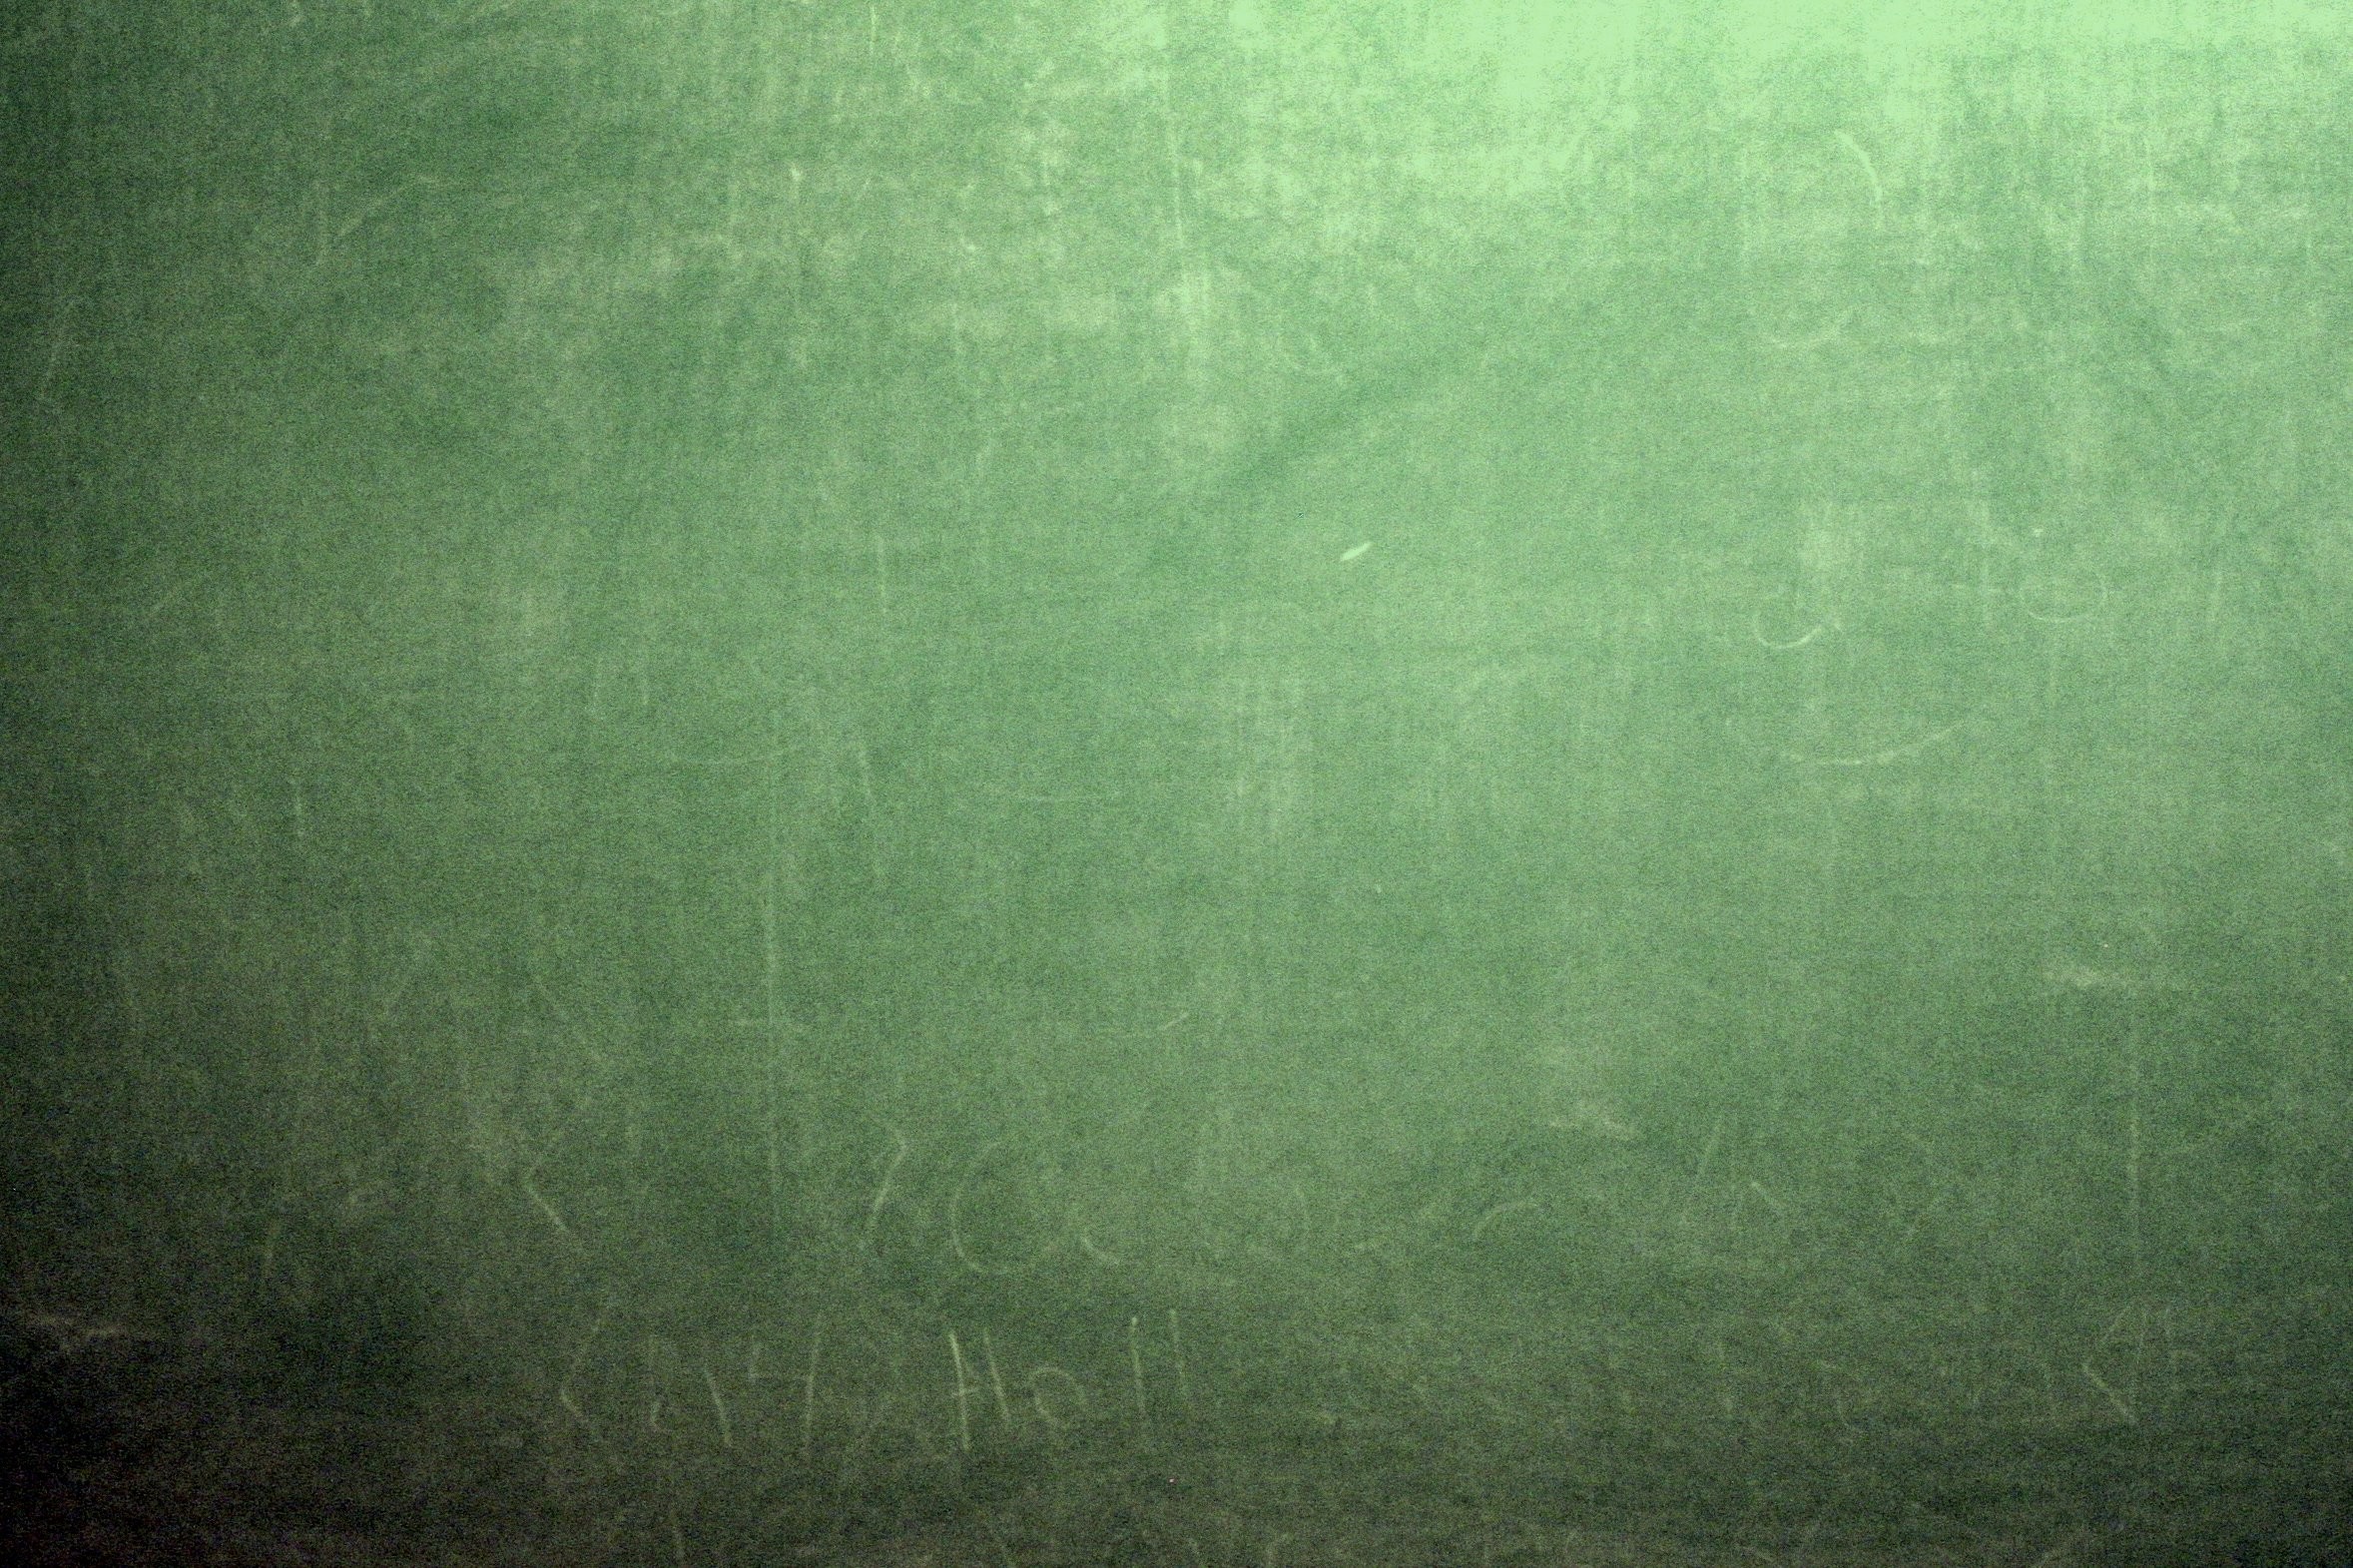  Chalkboard  background    Download free awesome HD 